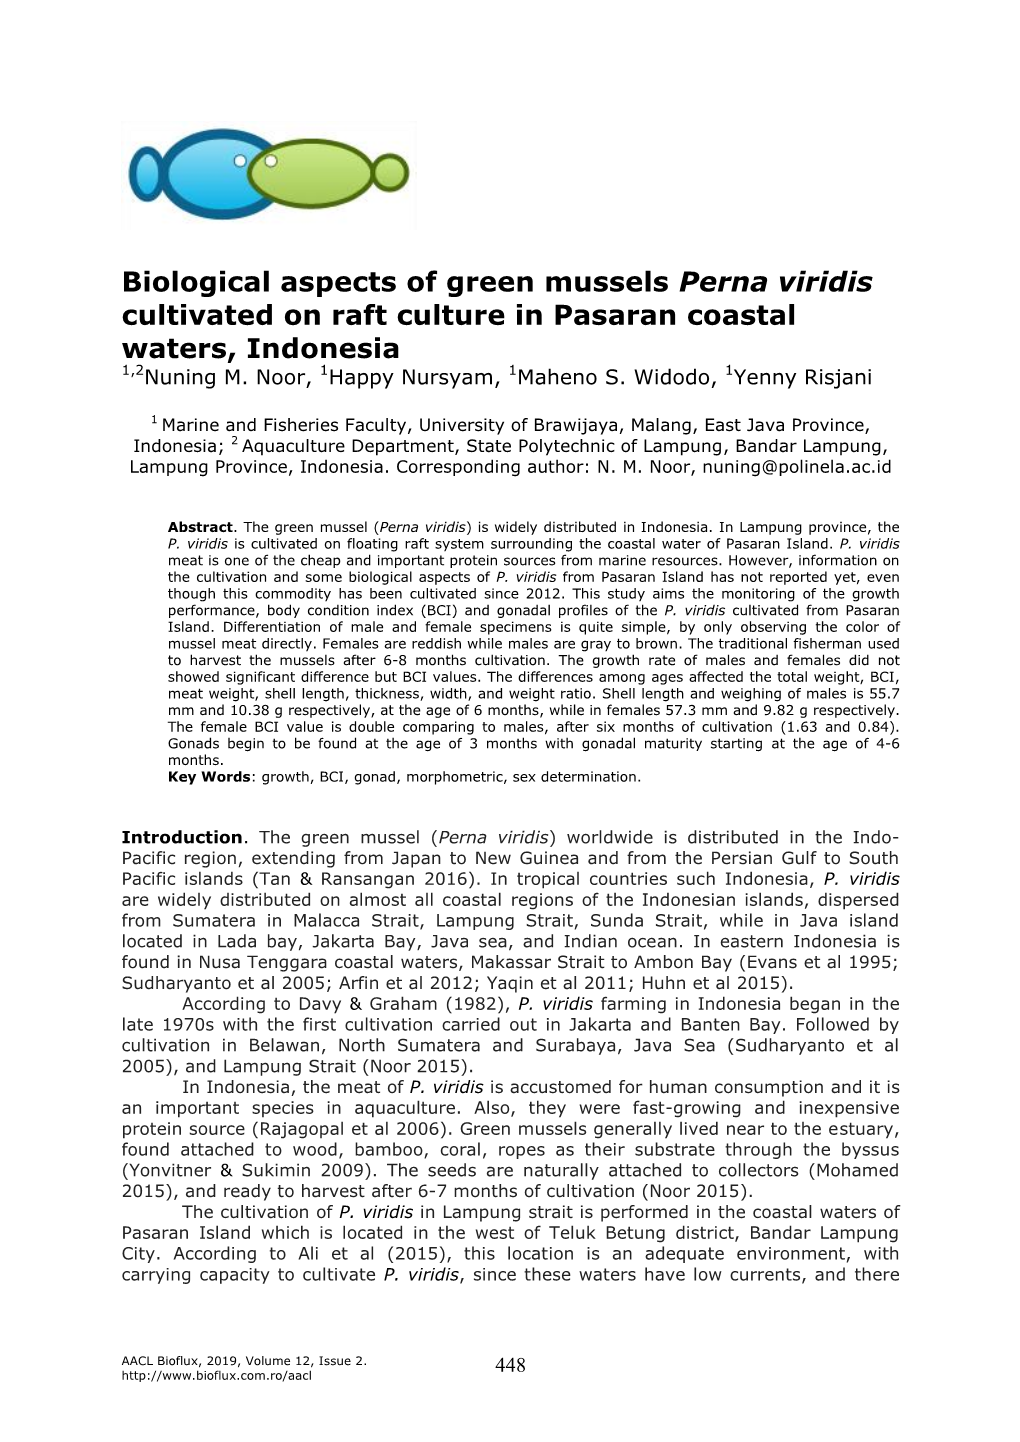 Biological Aspects of Green Mussels Perna Viridis Cultivated on Raft Culture in Pasaran Coastal Waters, Indonesia 1,2Nuning M